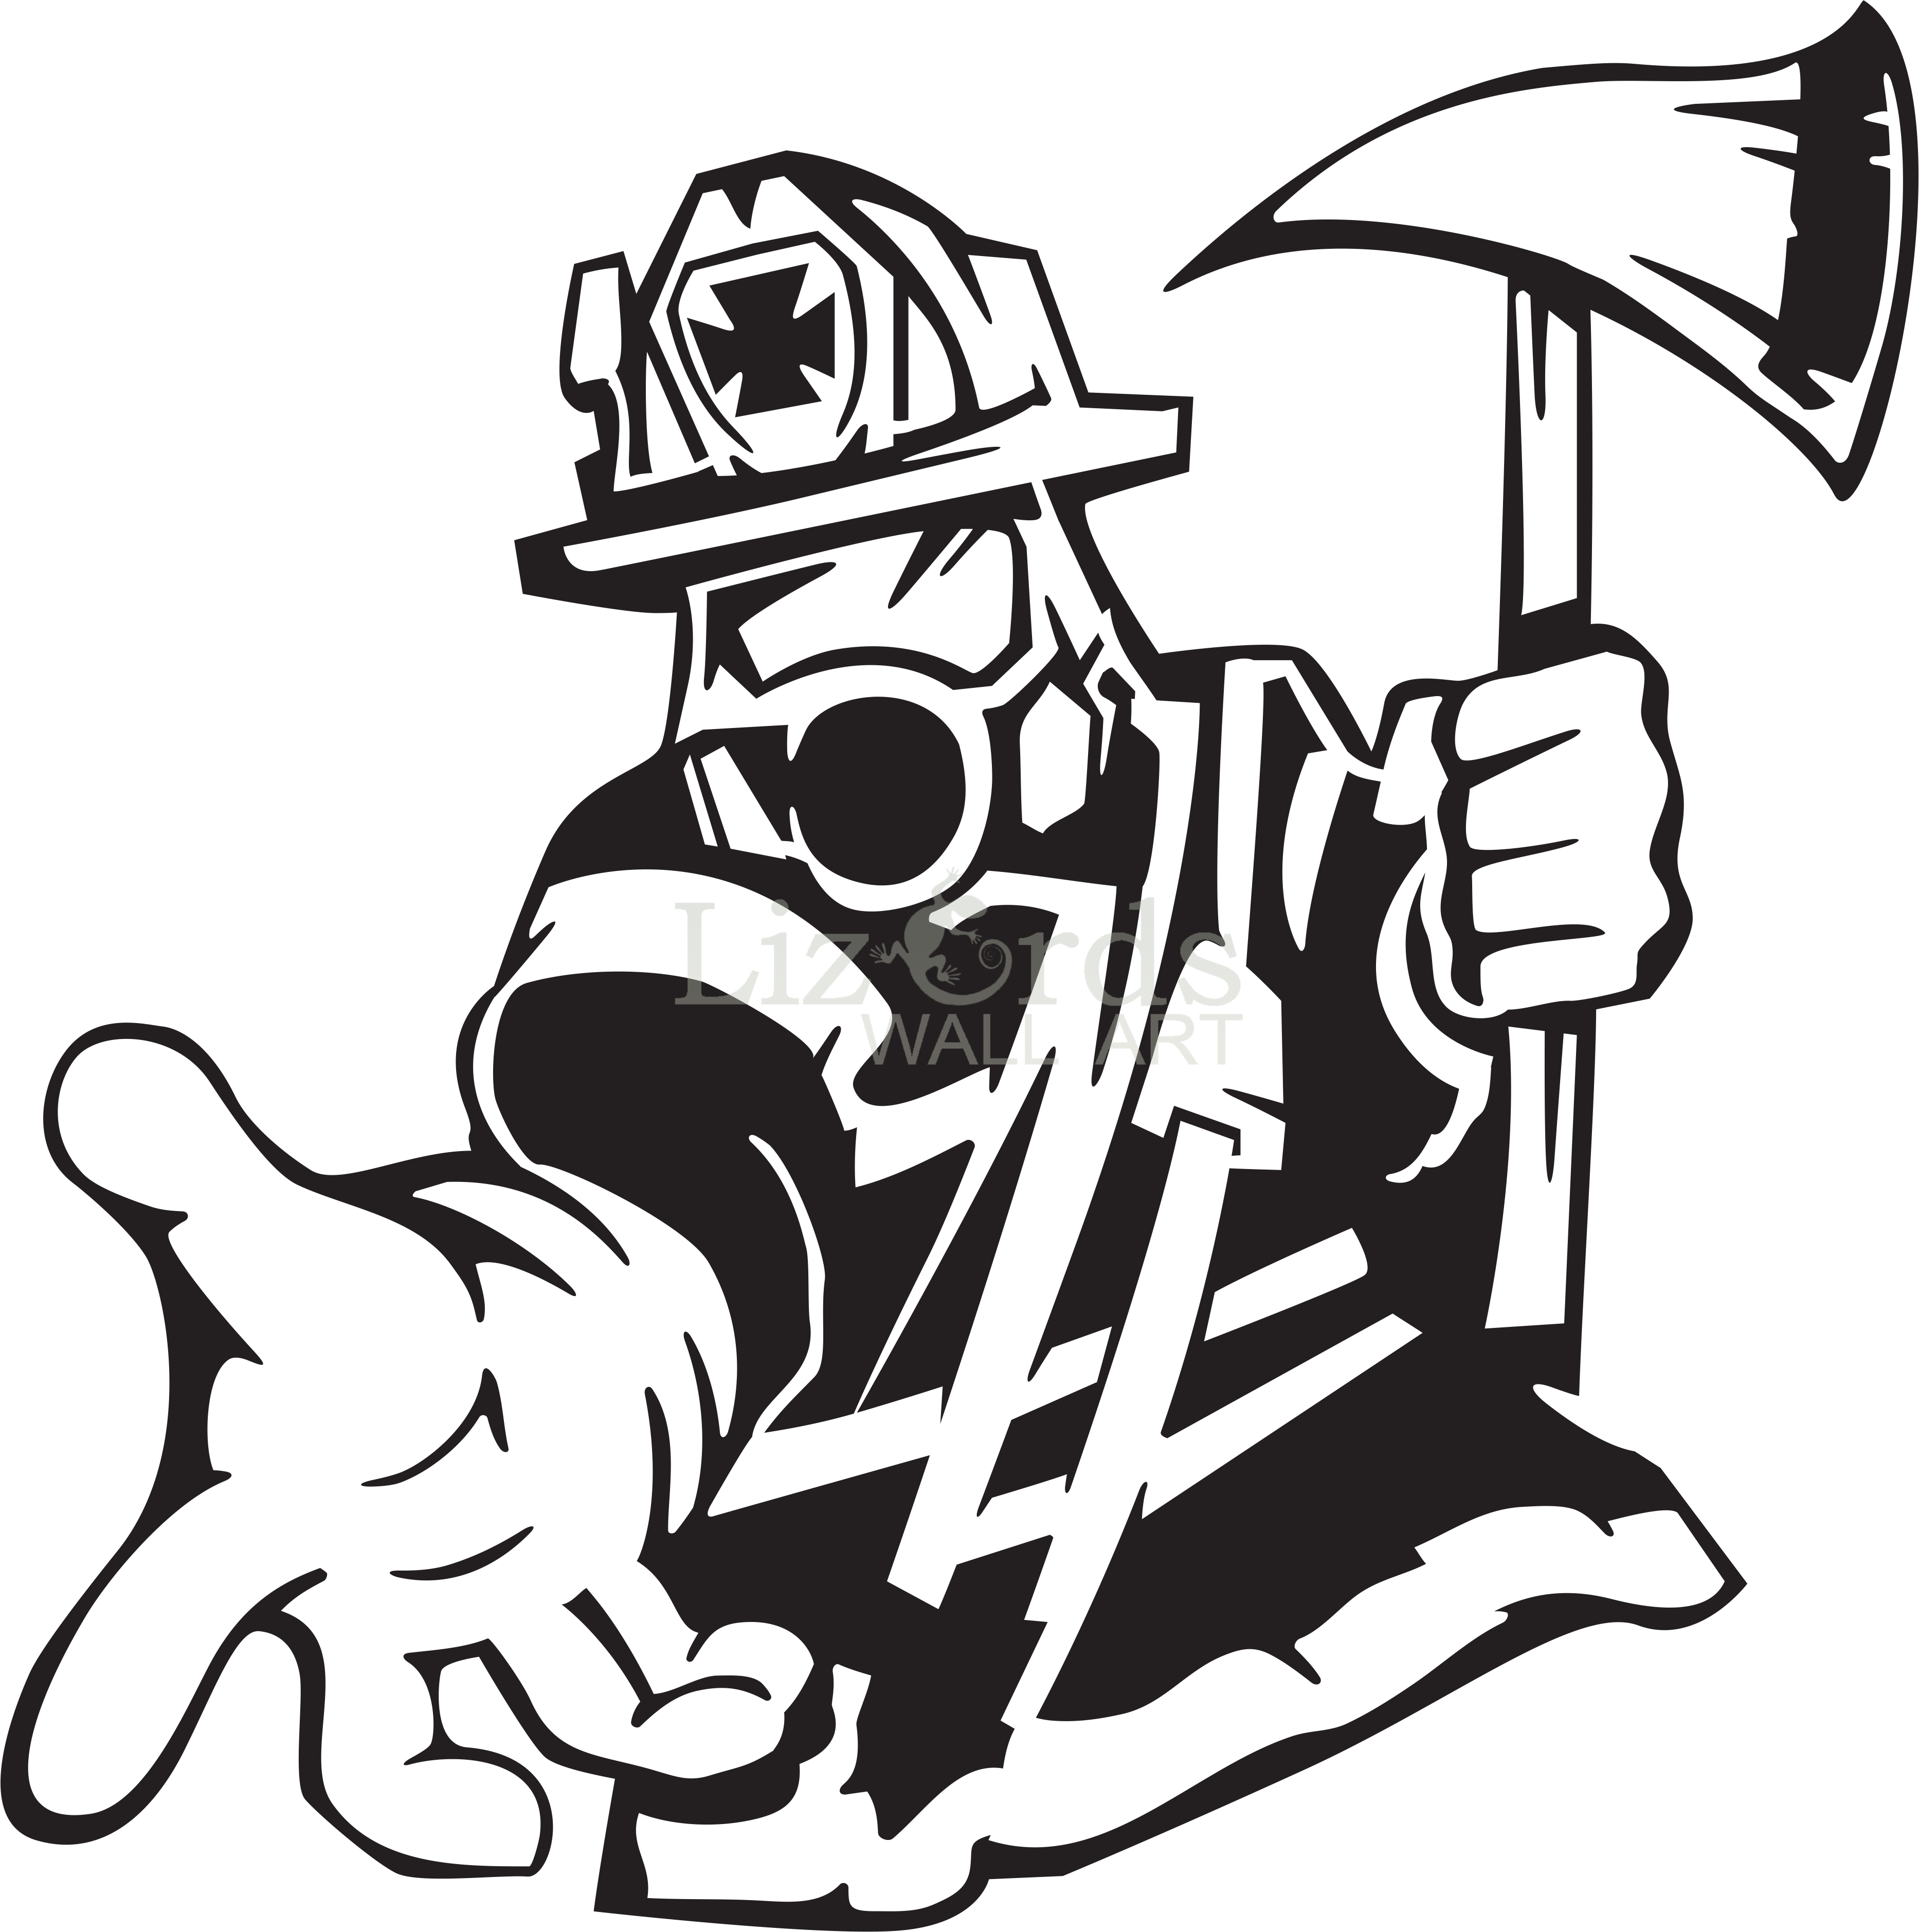 Firefighter Text Sticker Line Art Silhouette Fireman Png Download 3732 3758 Free Transparent Firefighter Png Download Clip Art Library Fireman stock vectors, illustrations and cliparts | stockfresh fireman sketch stock photo © rastudio. firefighter text sticker line art silhouette fireman png download 3732 3758 free transparent firefighter png download clip art library